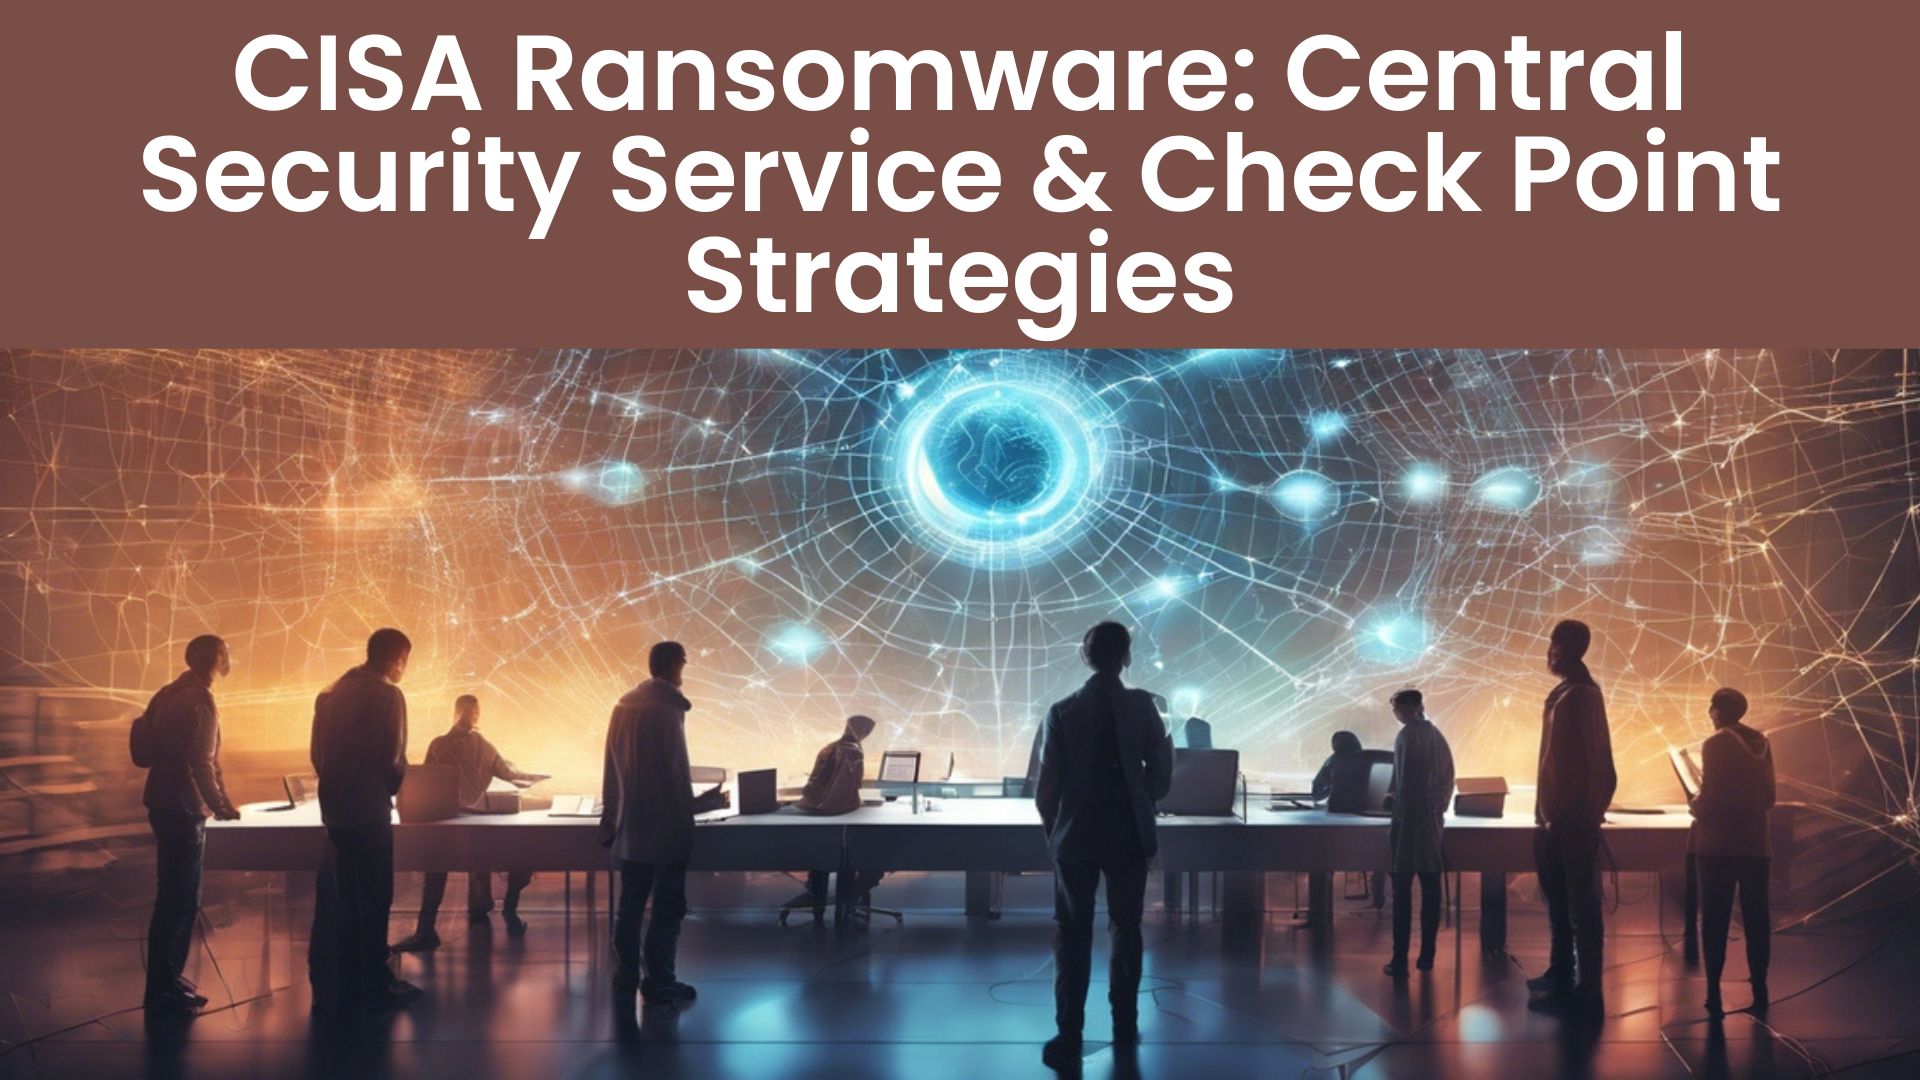 CISA Ransomware Central Security Service & Check Point Strategies